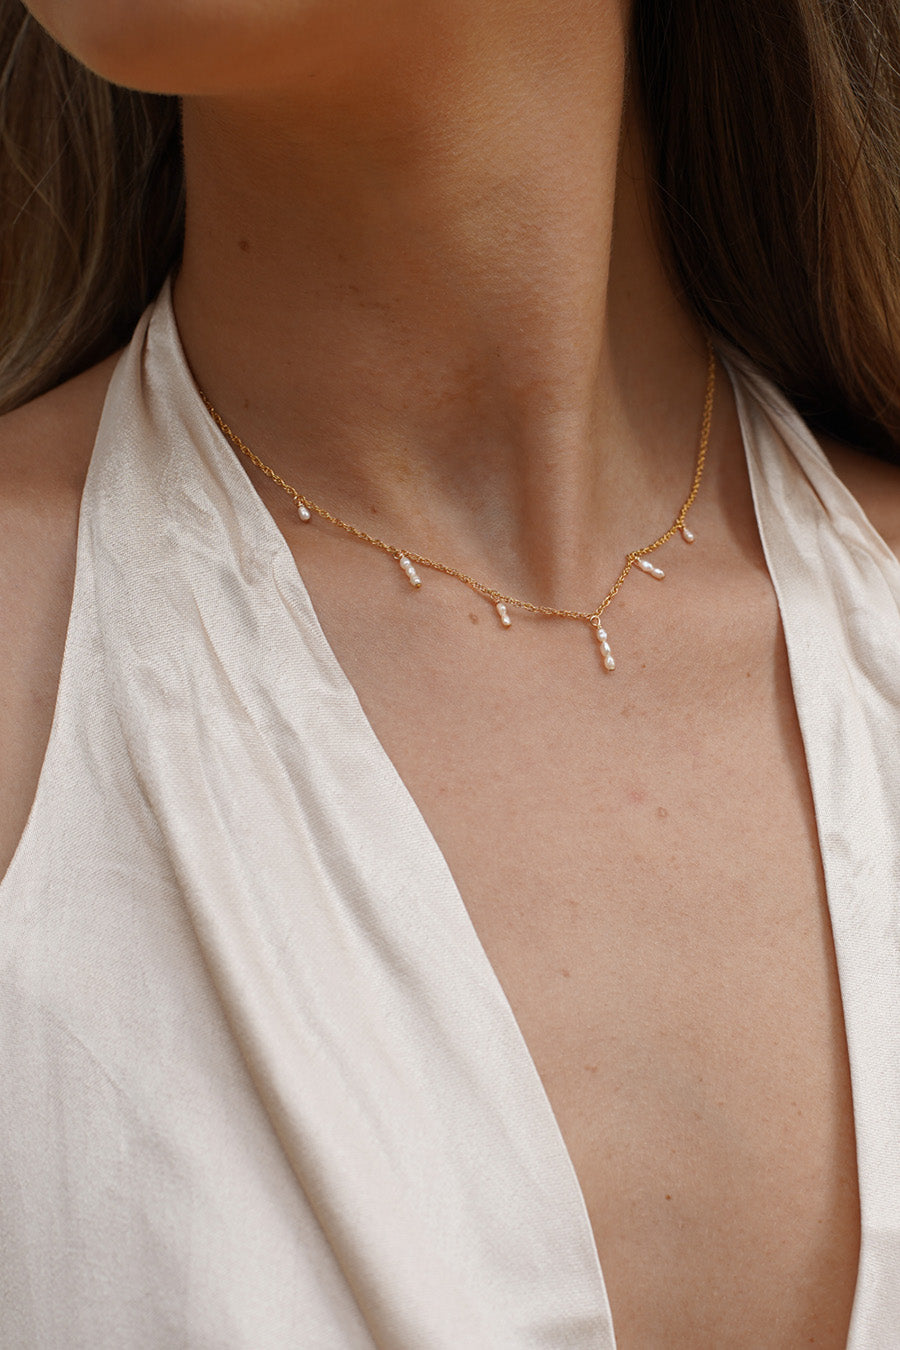 Ani Pearl Droplets Necklace